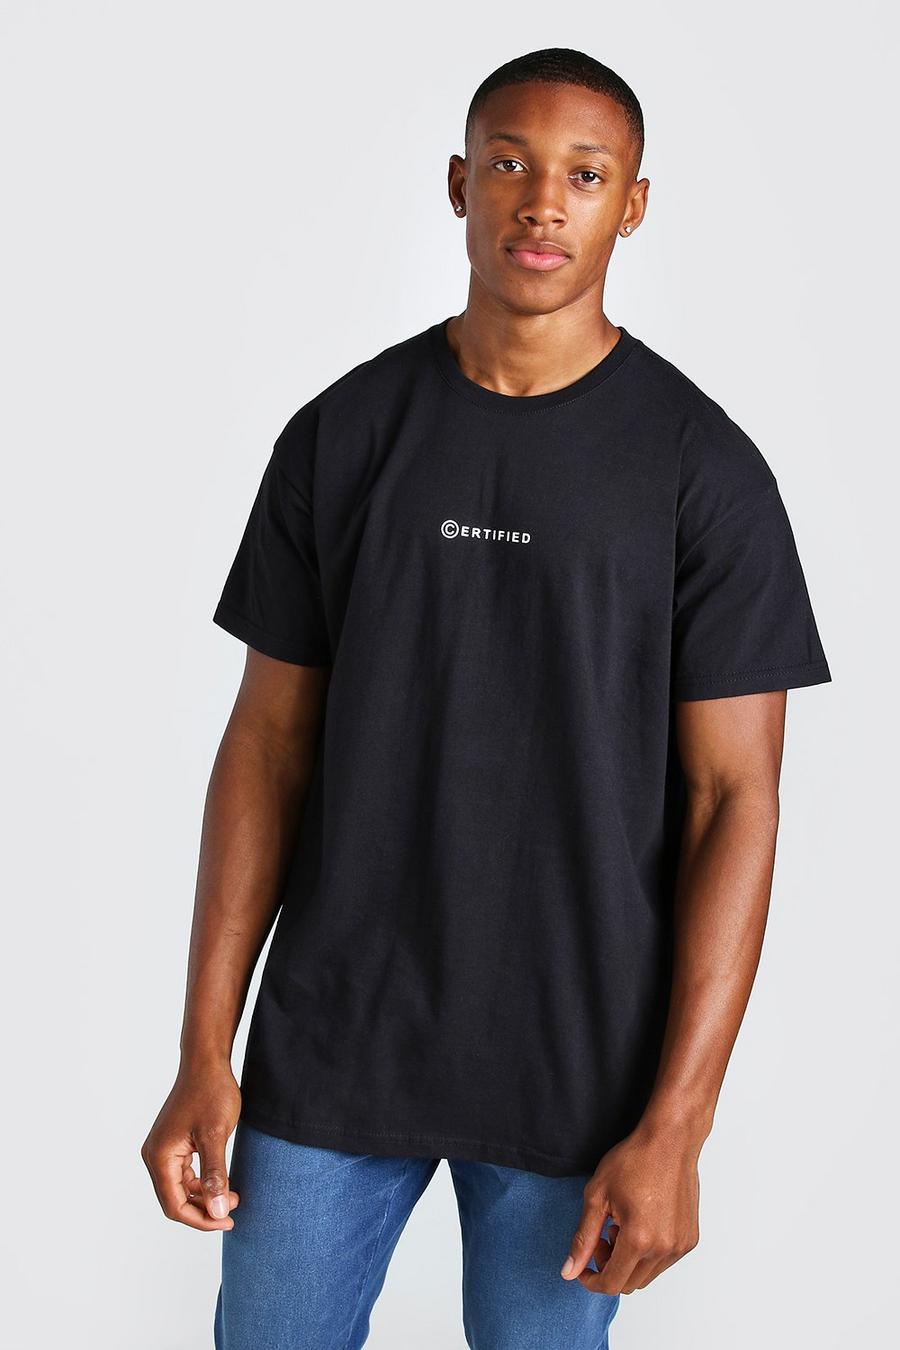 Black Oversized Certified Graphic T-Shirt image number 1